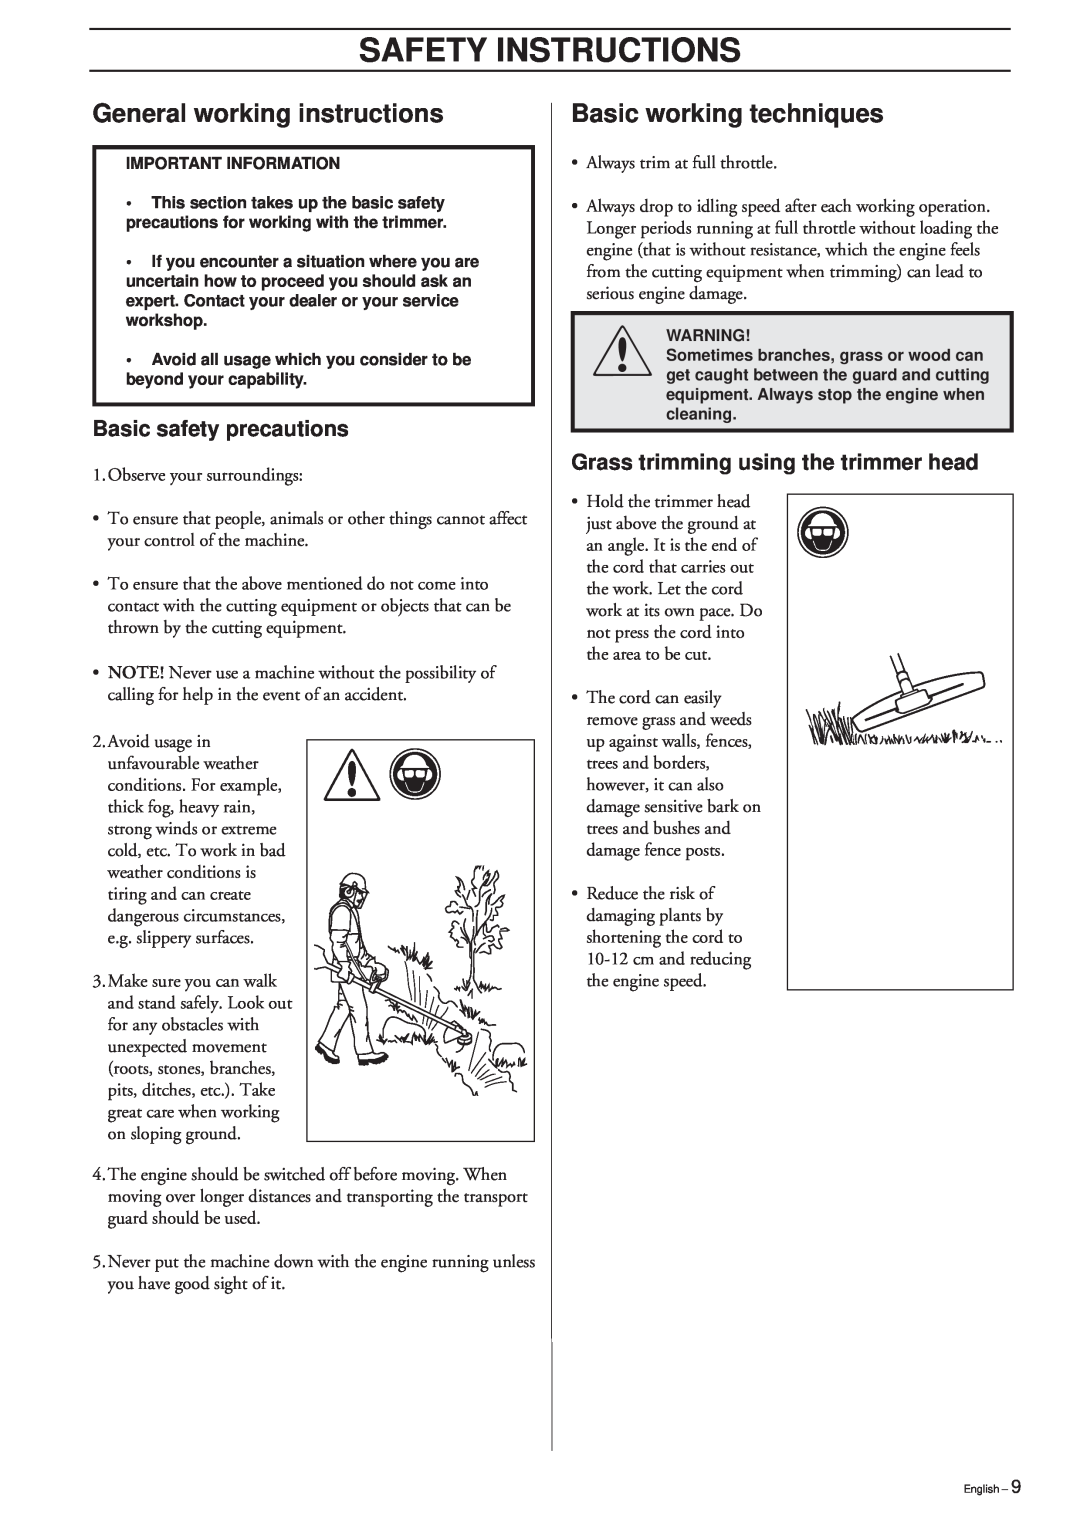 Husqvarna 225LD General working instructions, Basic working techniques, Basic safety precautions, Safety Instructions 